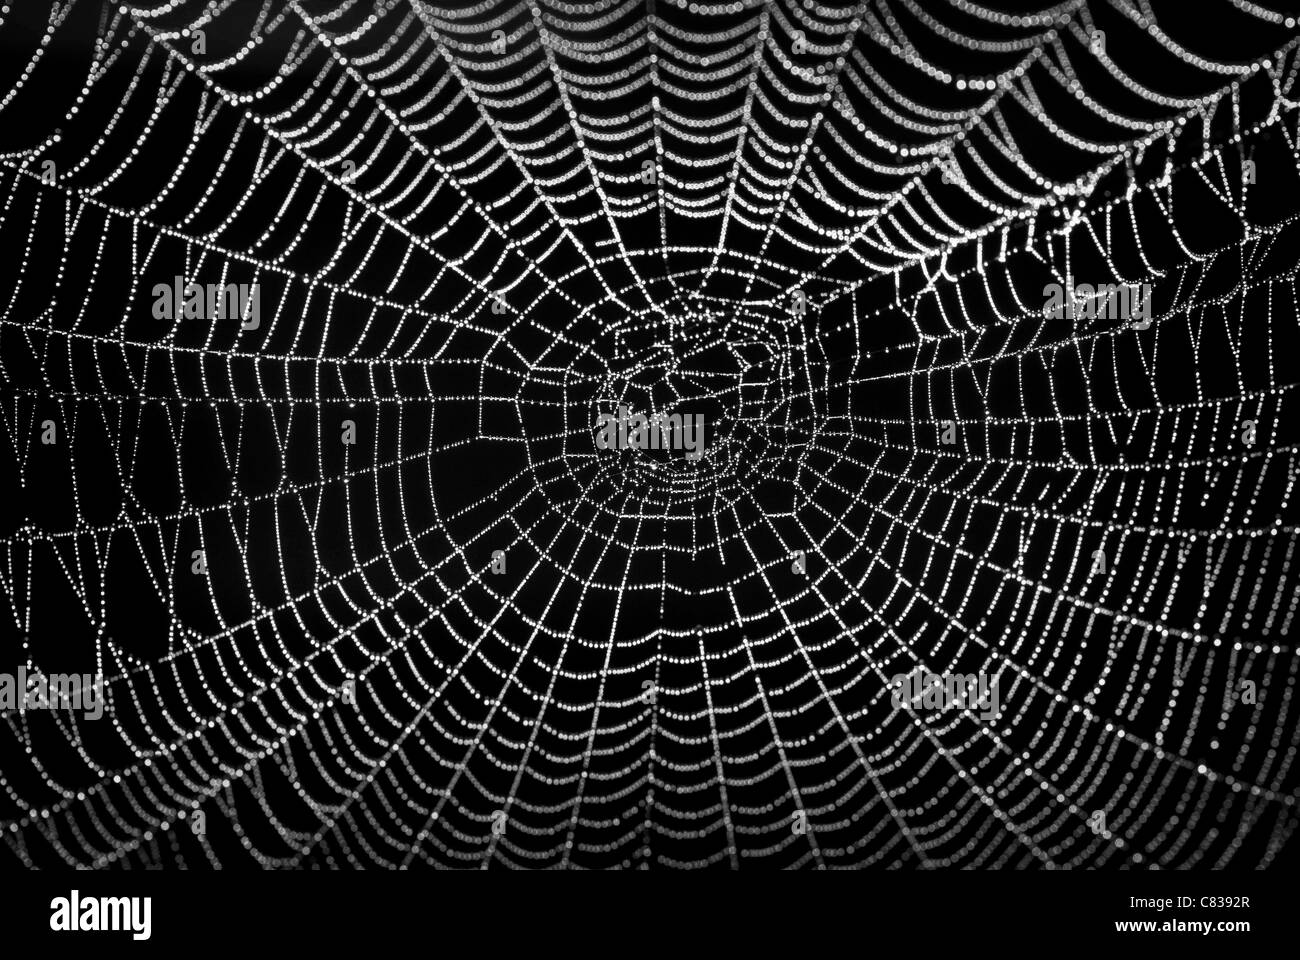 Spiders web covered in dew with black background. Stock Photo